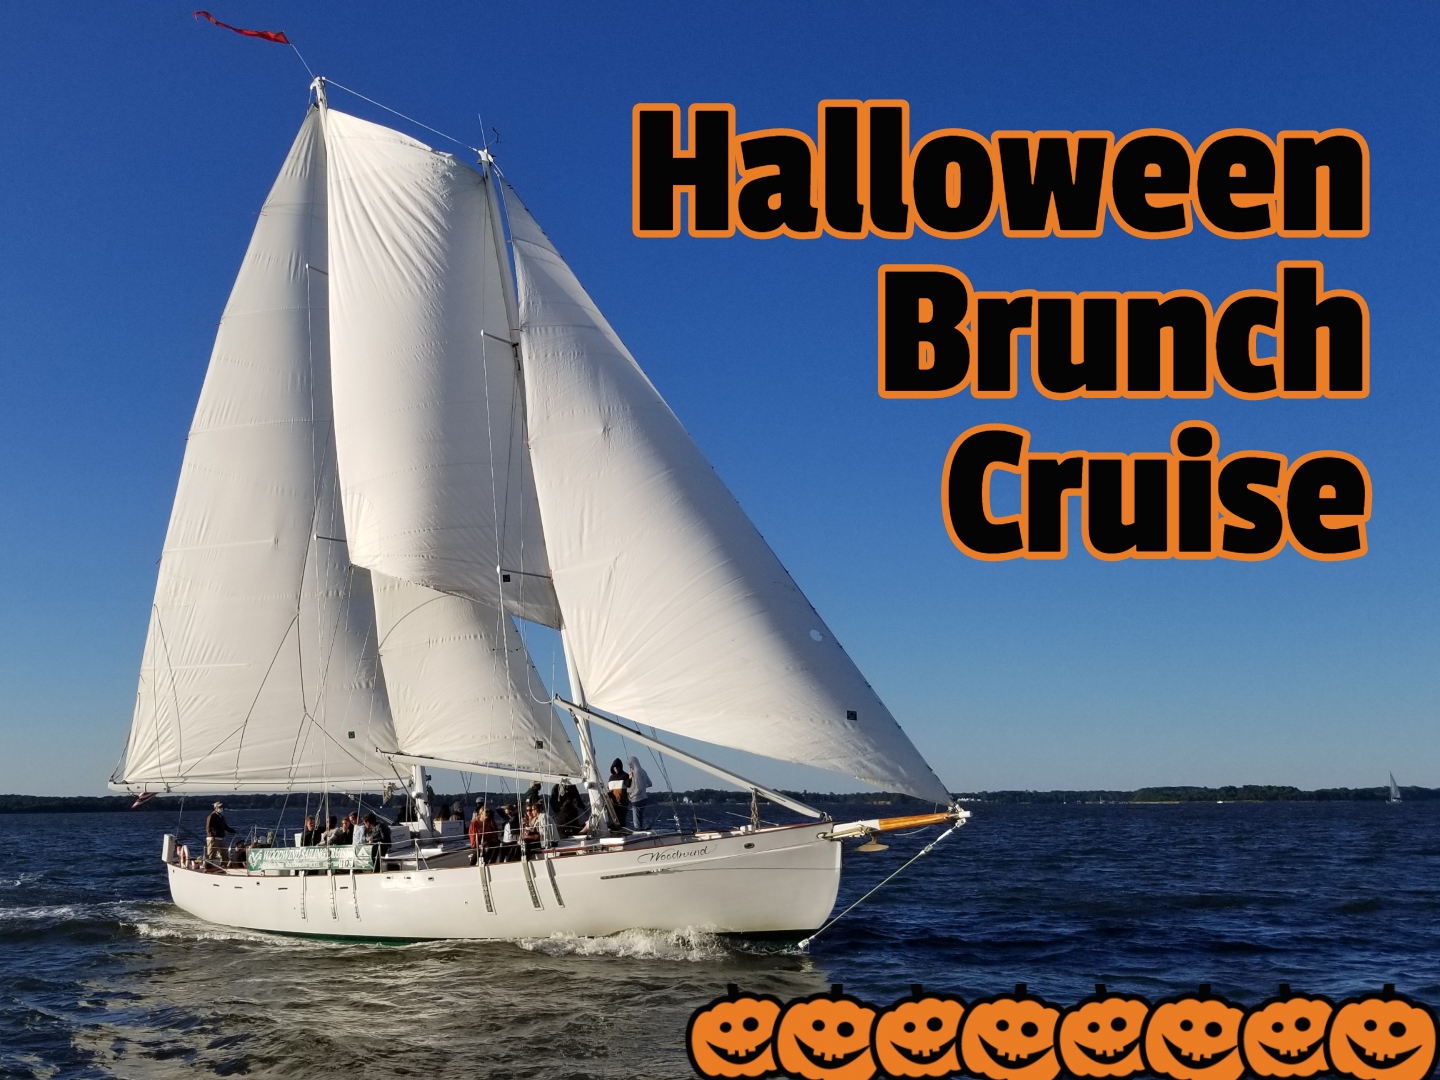 Come sailing on our Halloween Brunch Cruise!